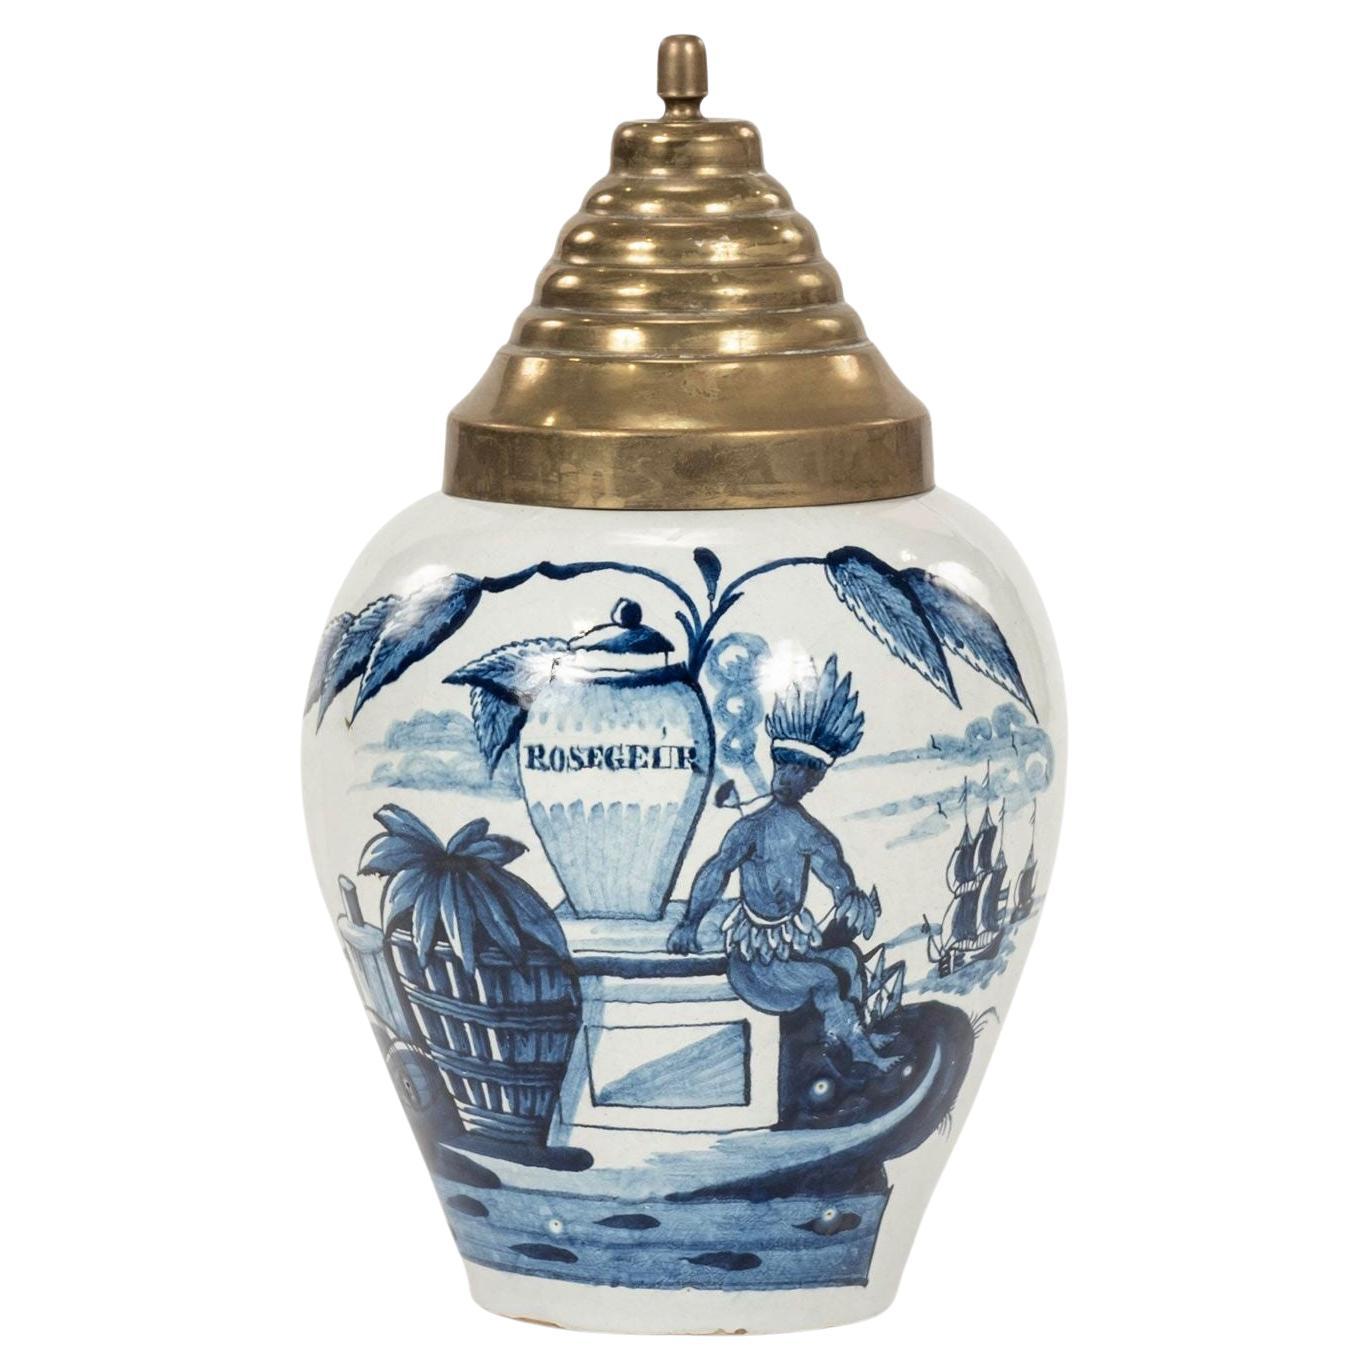 Delft Blue and White “Rosegeur” Tobacco Jar For Sale